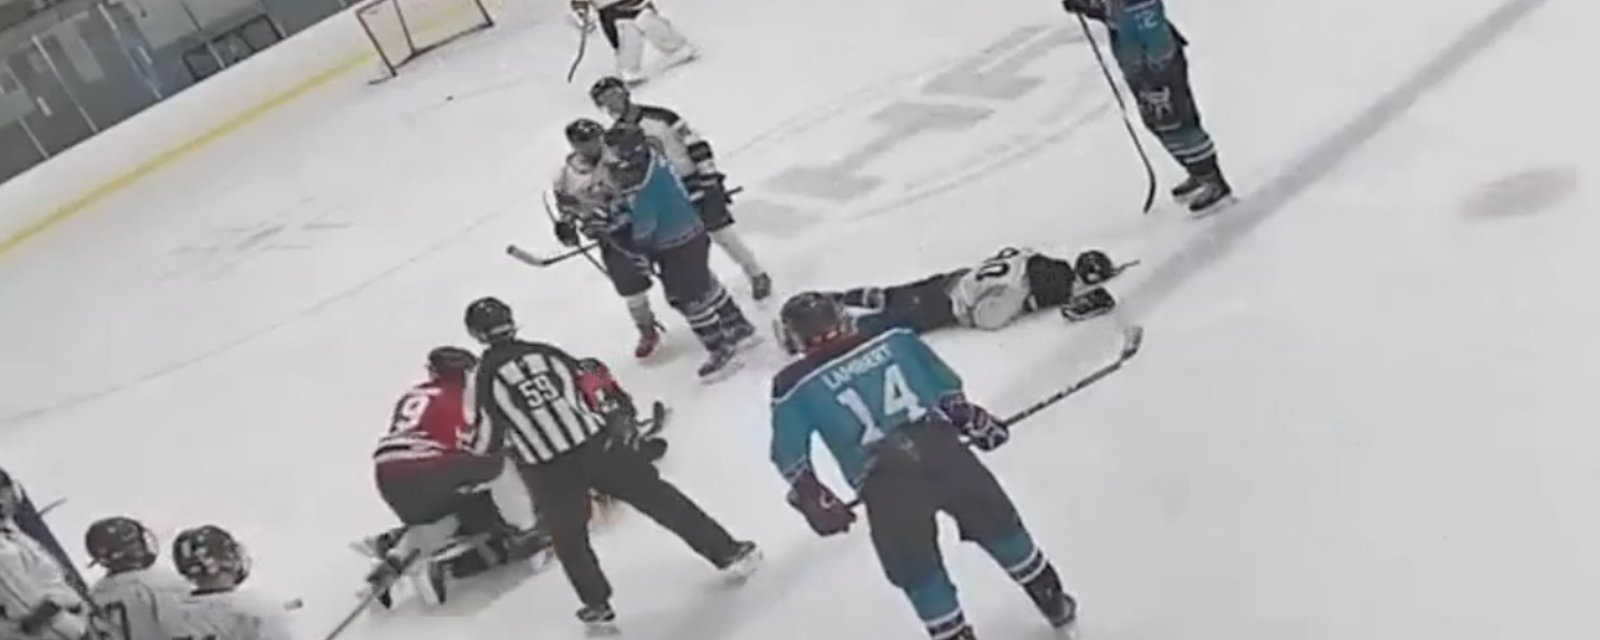 Player uses skate blade to attack rival’s face during on-ice fight